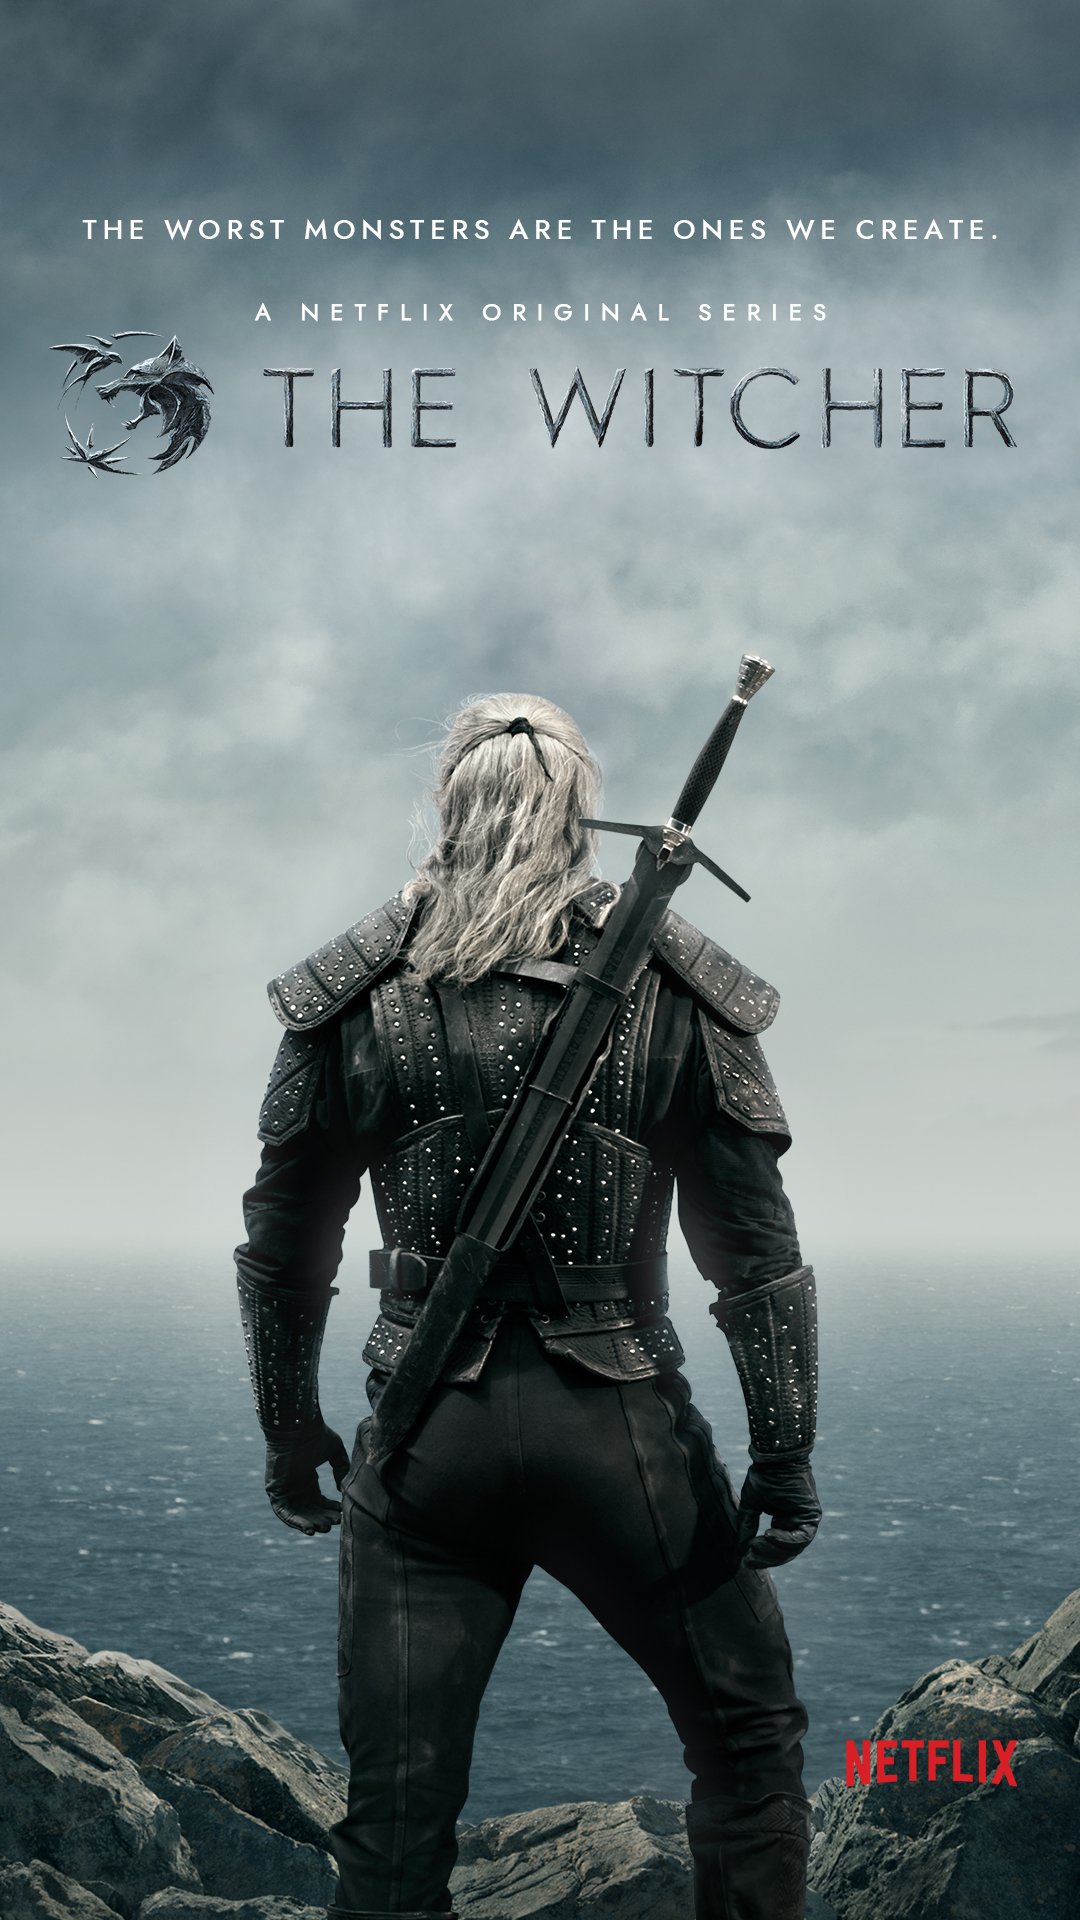 thewitcher_igstory_poster.jpg